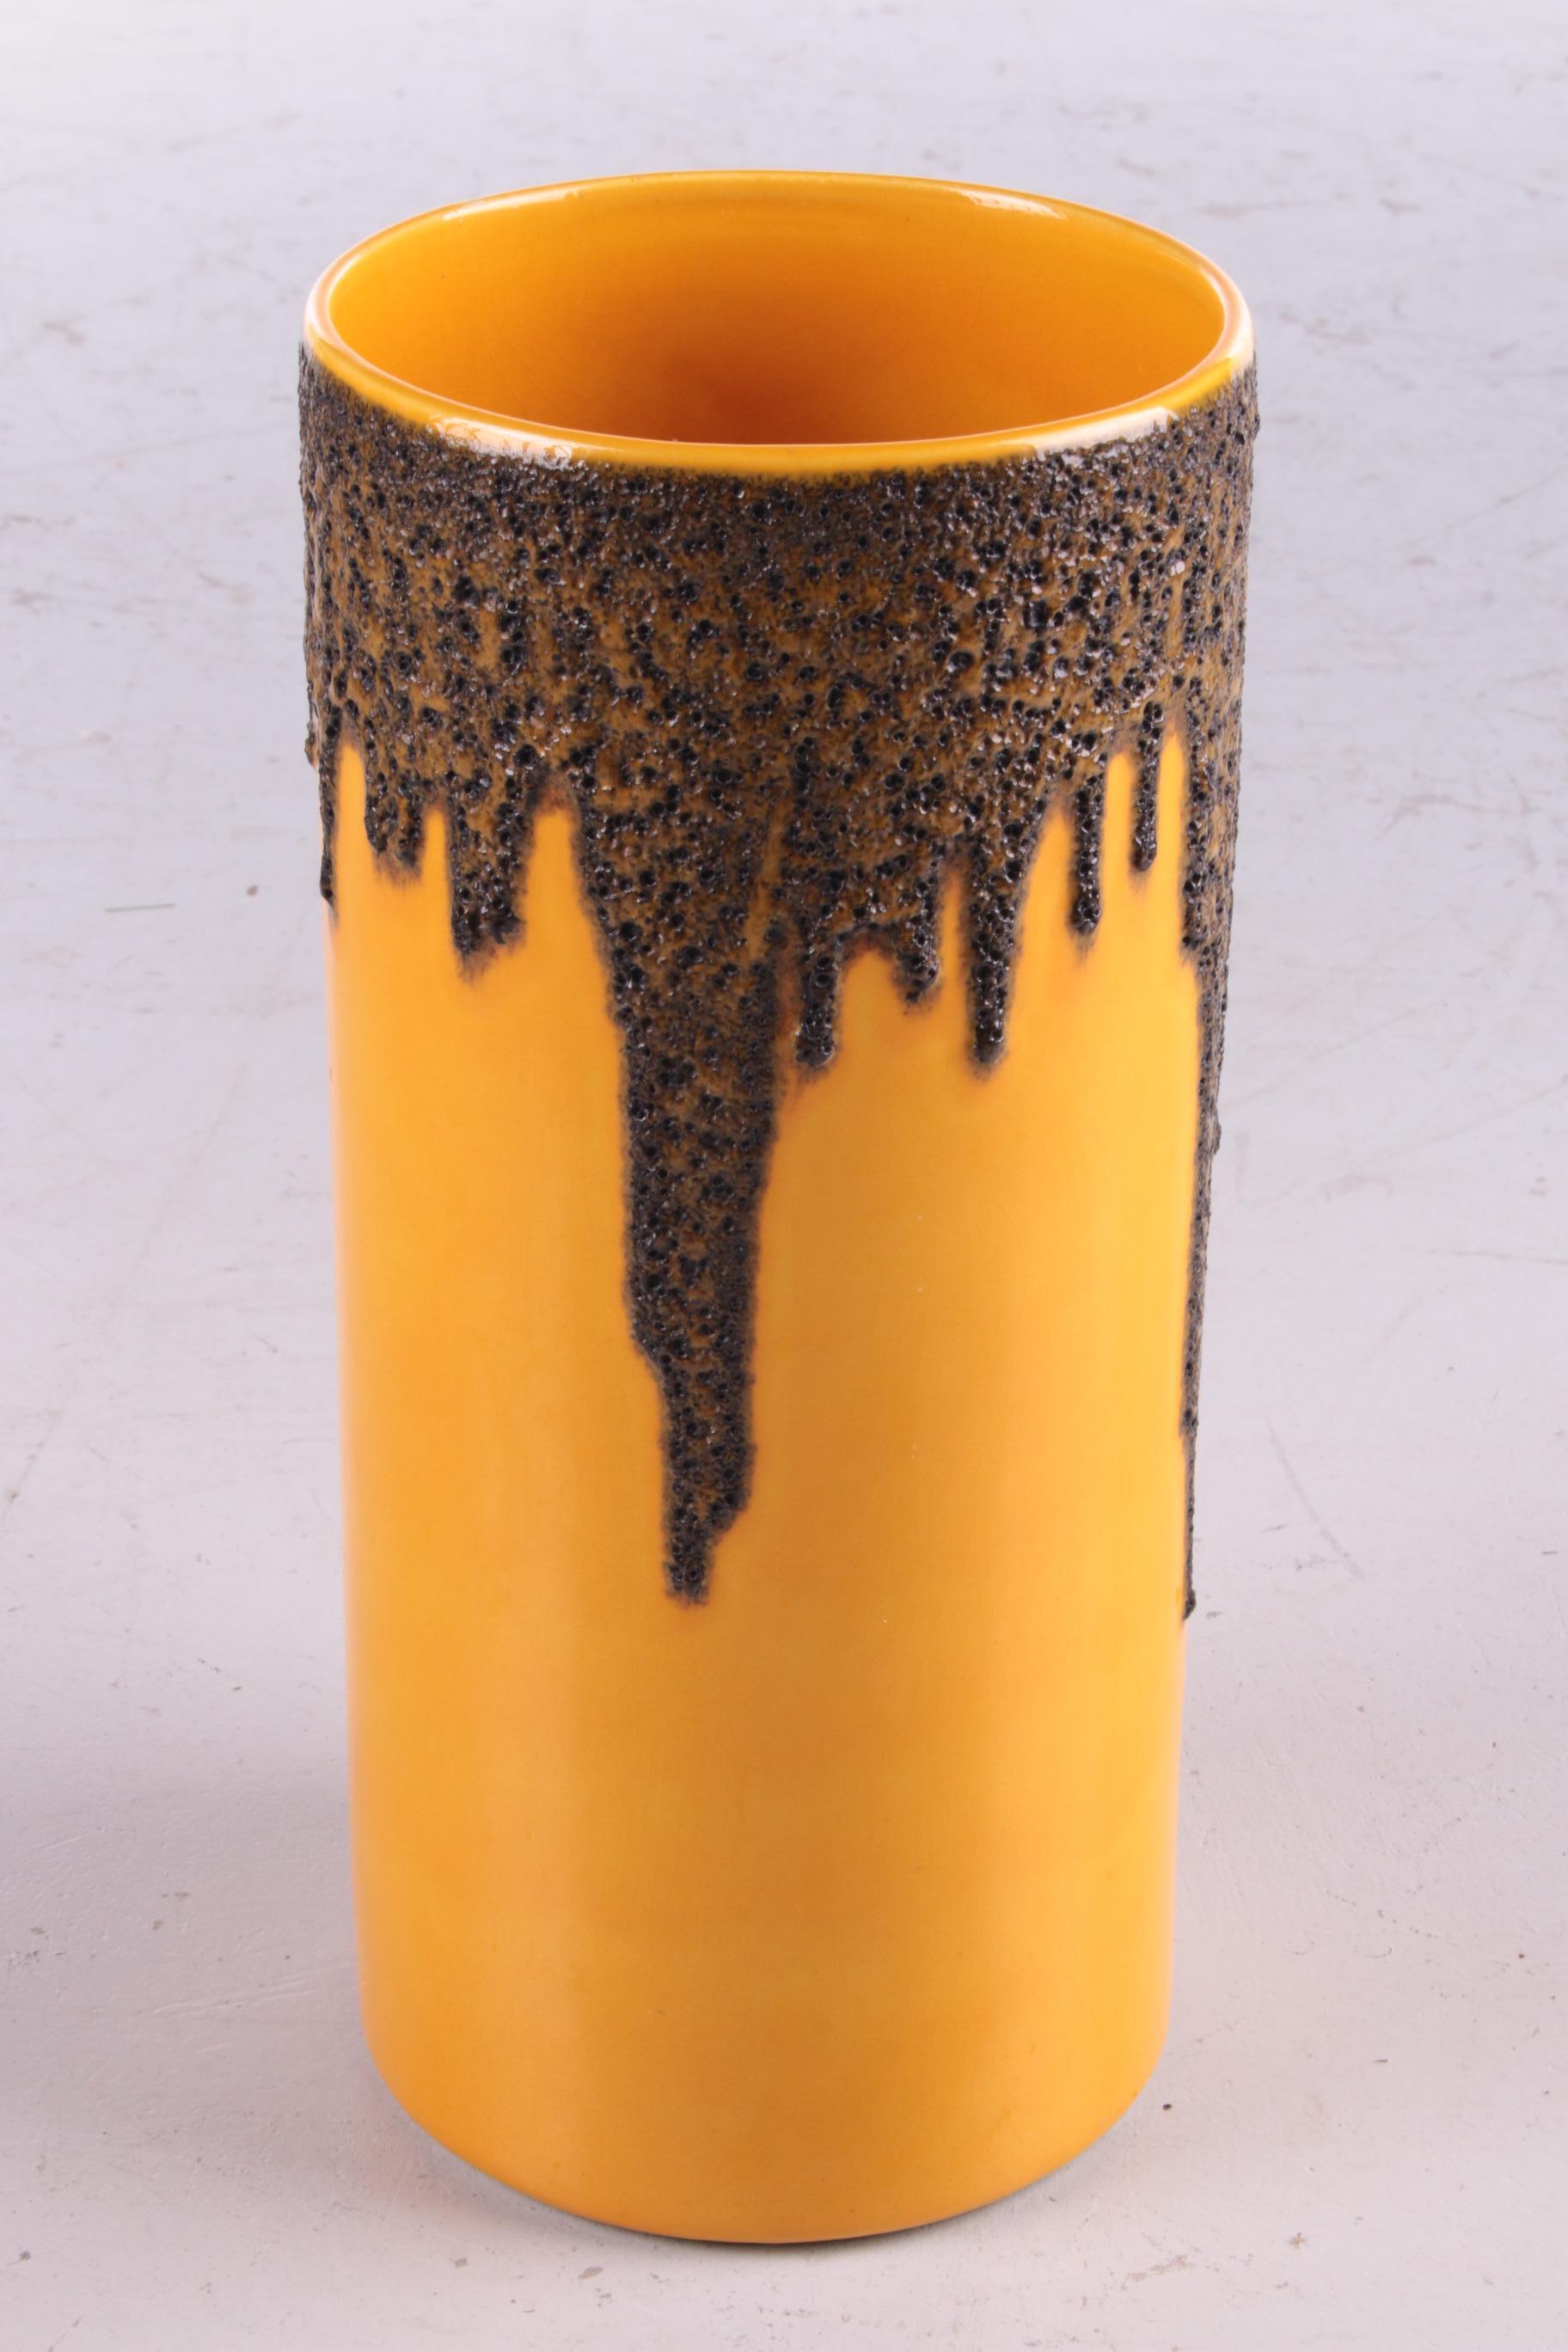 Vintage yellow ceramic fat lava vase by Scheurich,1960s


This is a beautiful modern ceramic vase.

The black that runs down resembles lava, hence the name.

Marked w, Germany.

Scheurich design made in the 1960s

Fits in many interiors